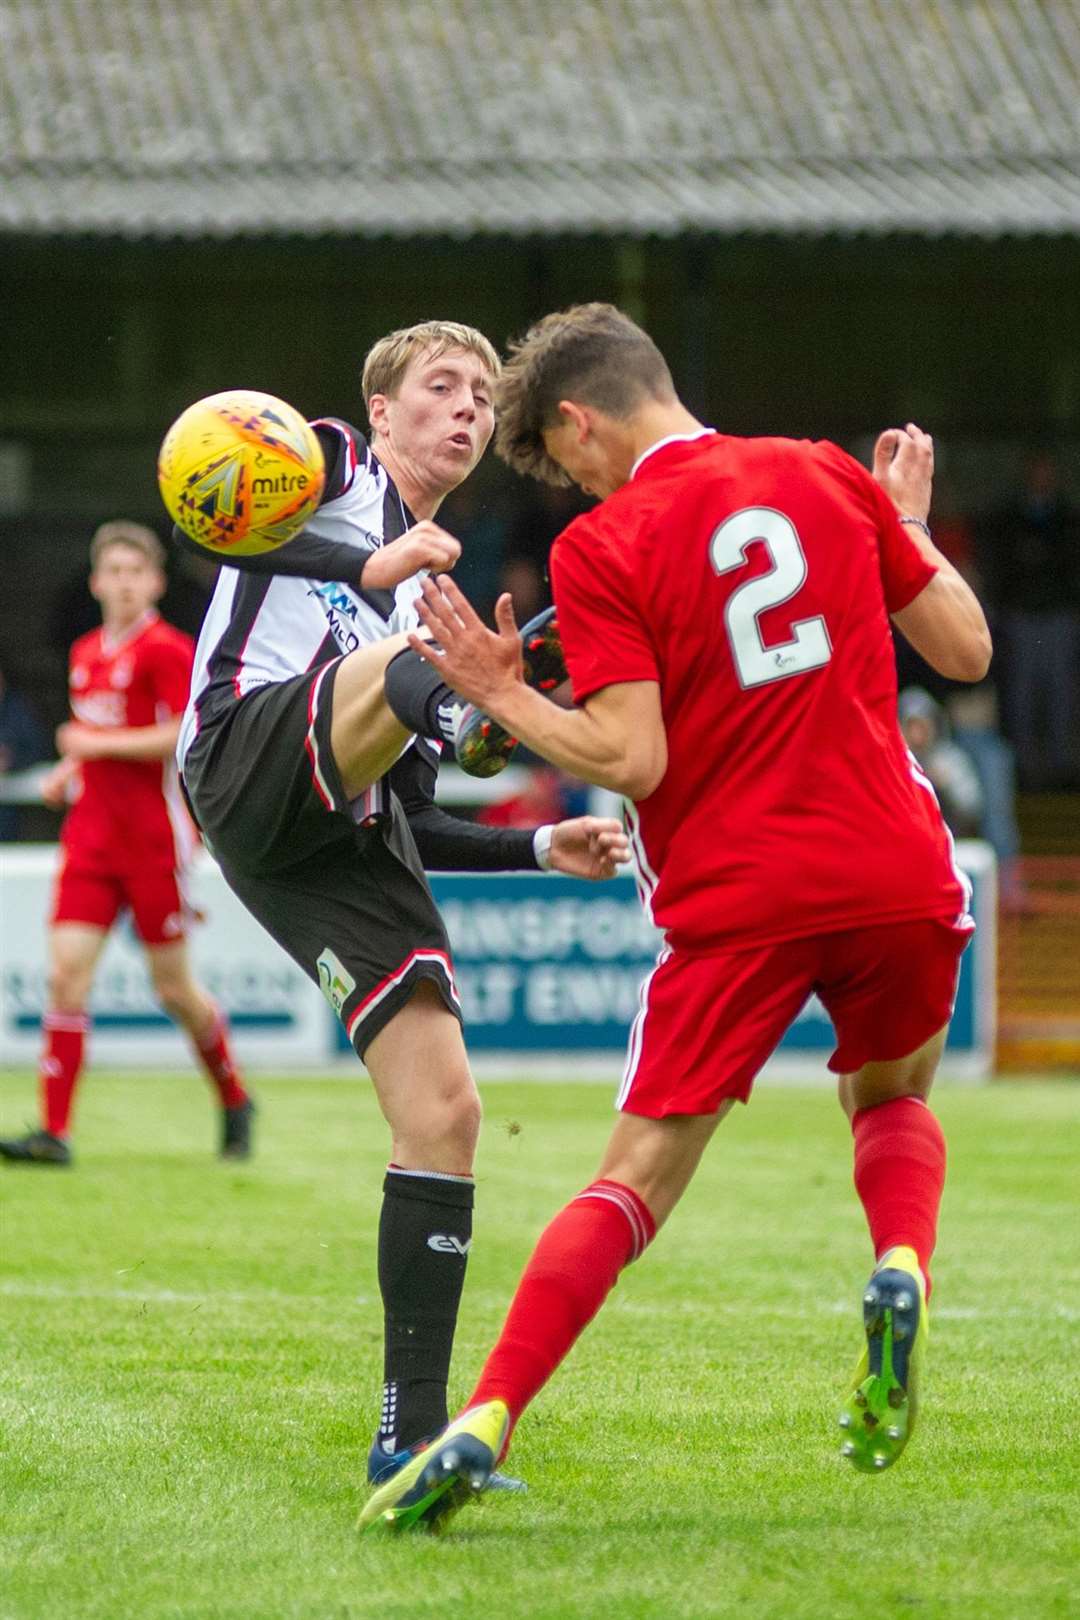 Kane Hester opened the scoring in Elgin's 2-0 cup win at Airdrie.